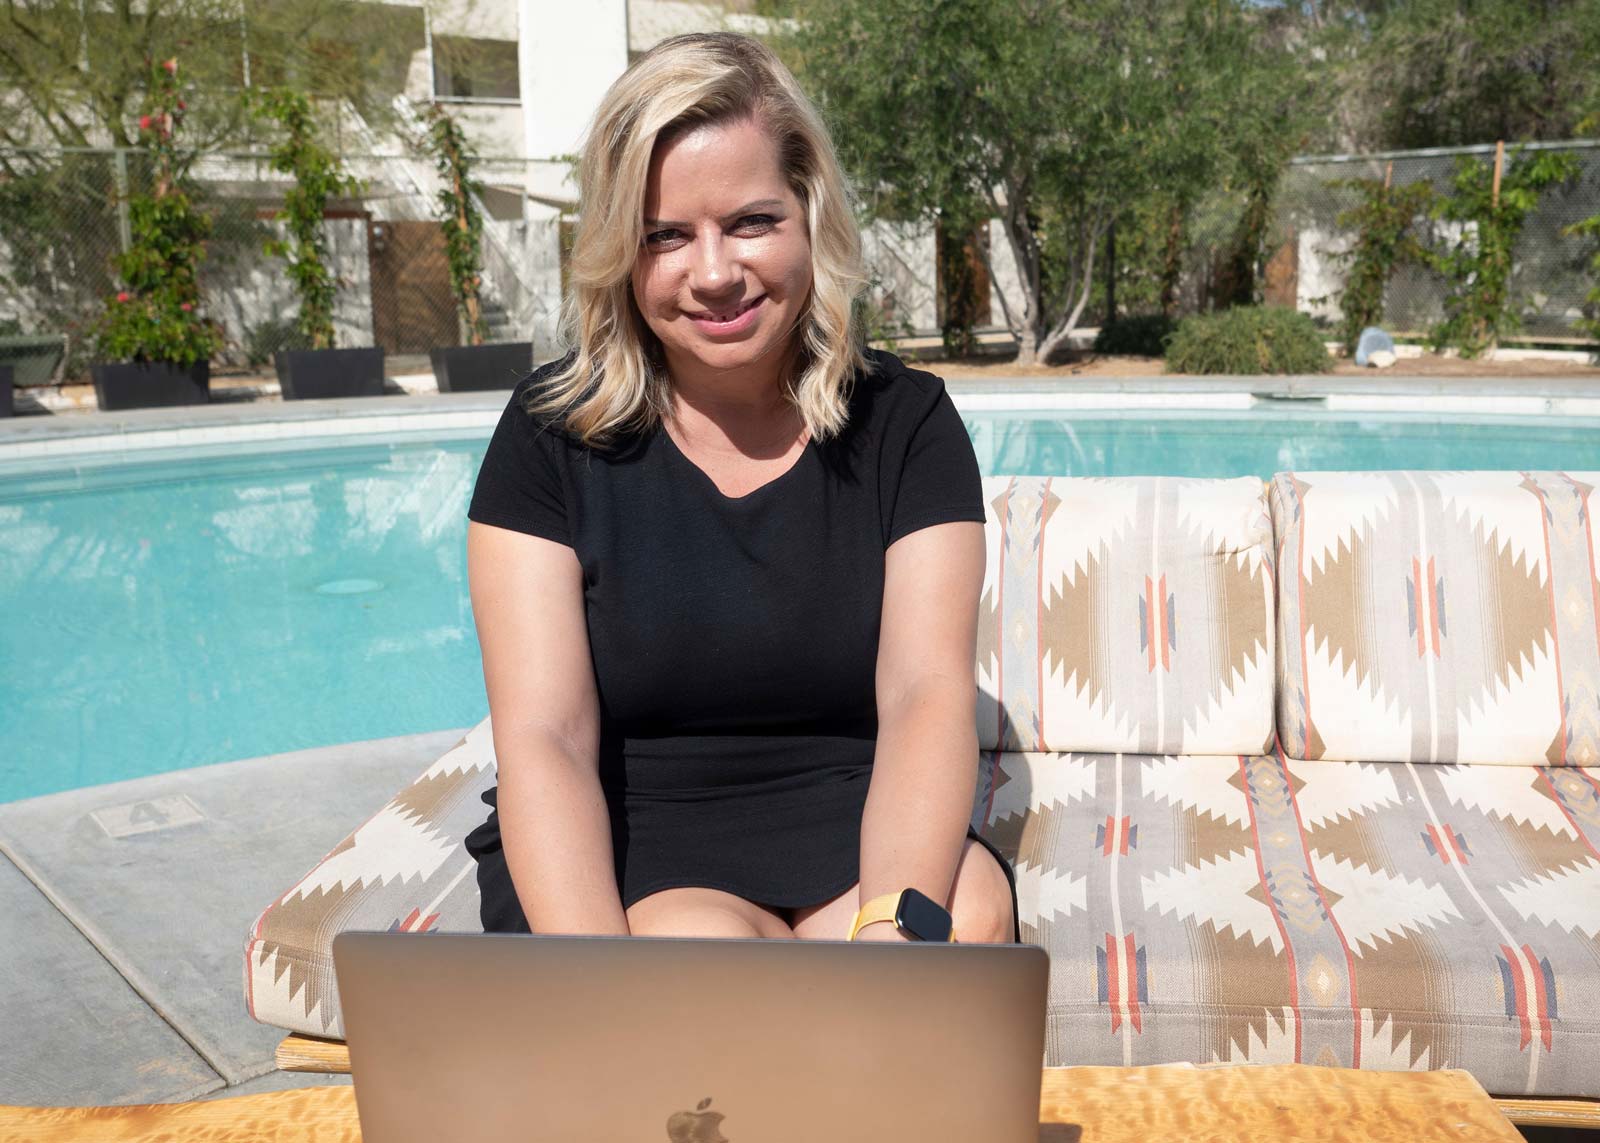 Lisa Burford working on a laptop while sitting by a pool in Palm Springs, California